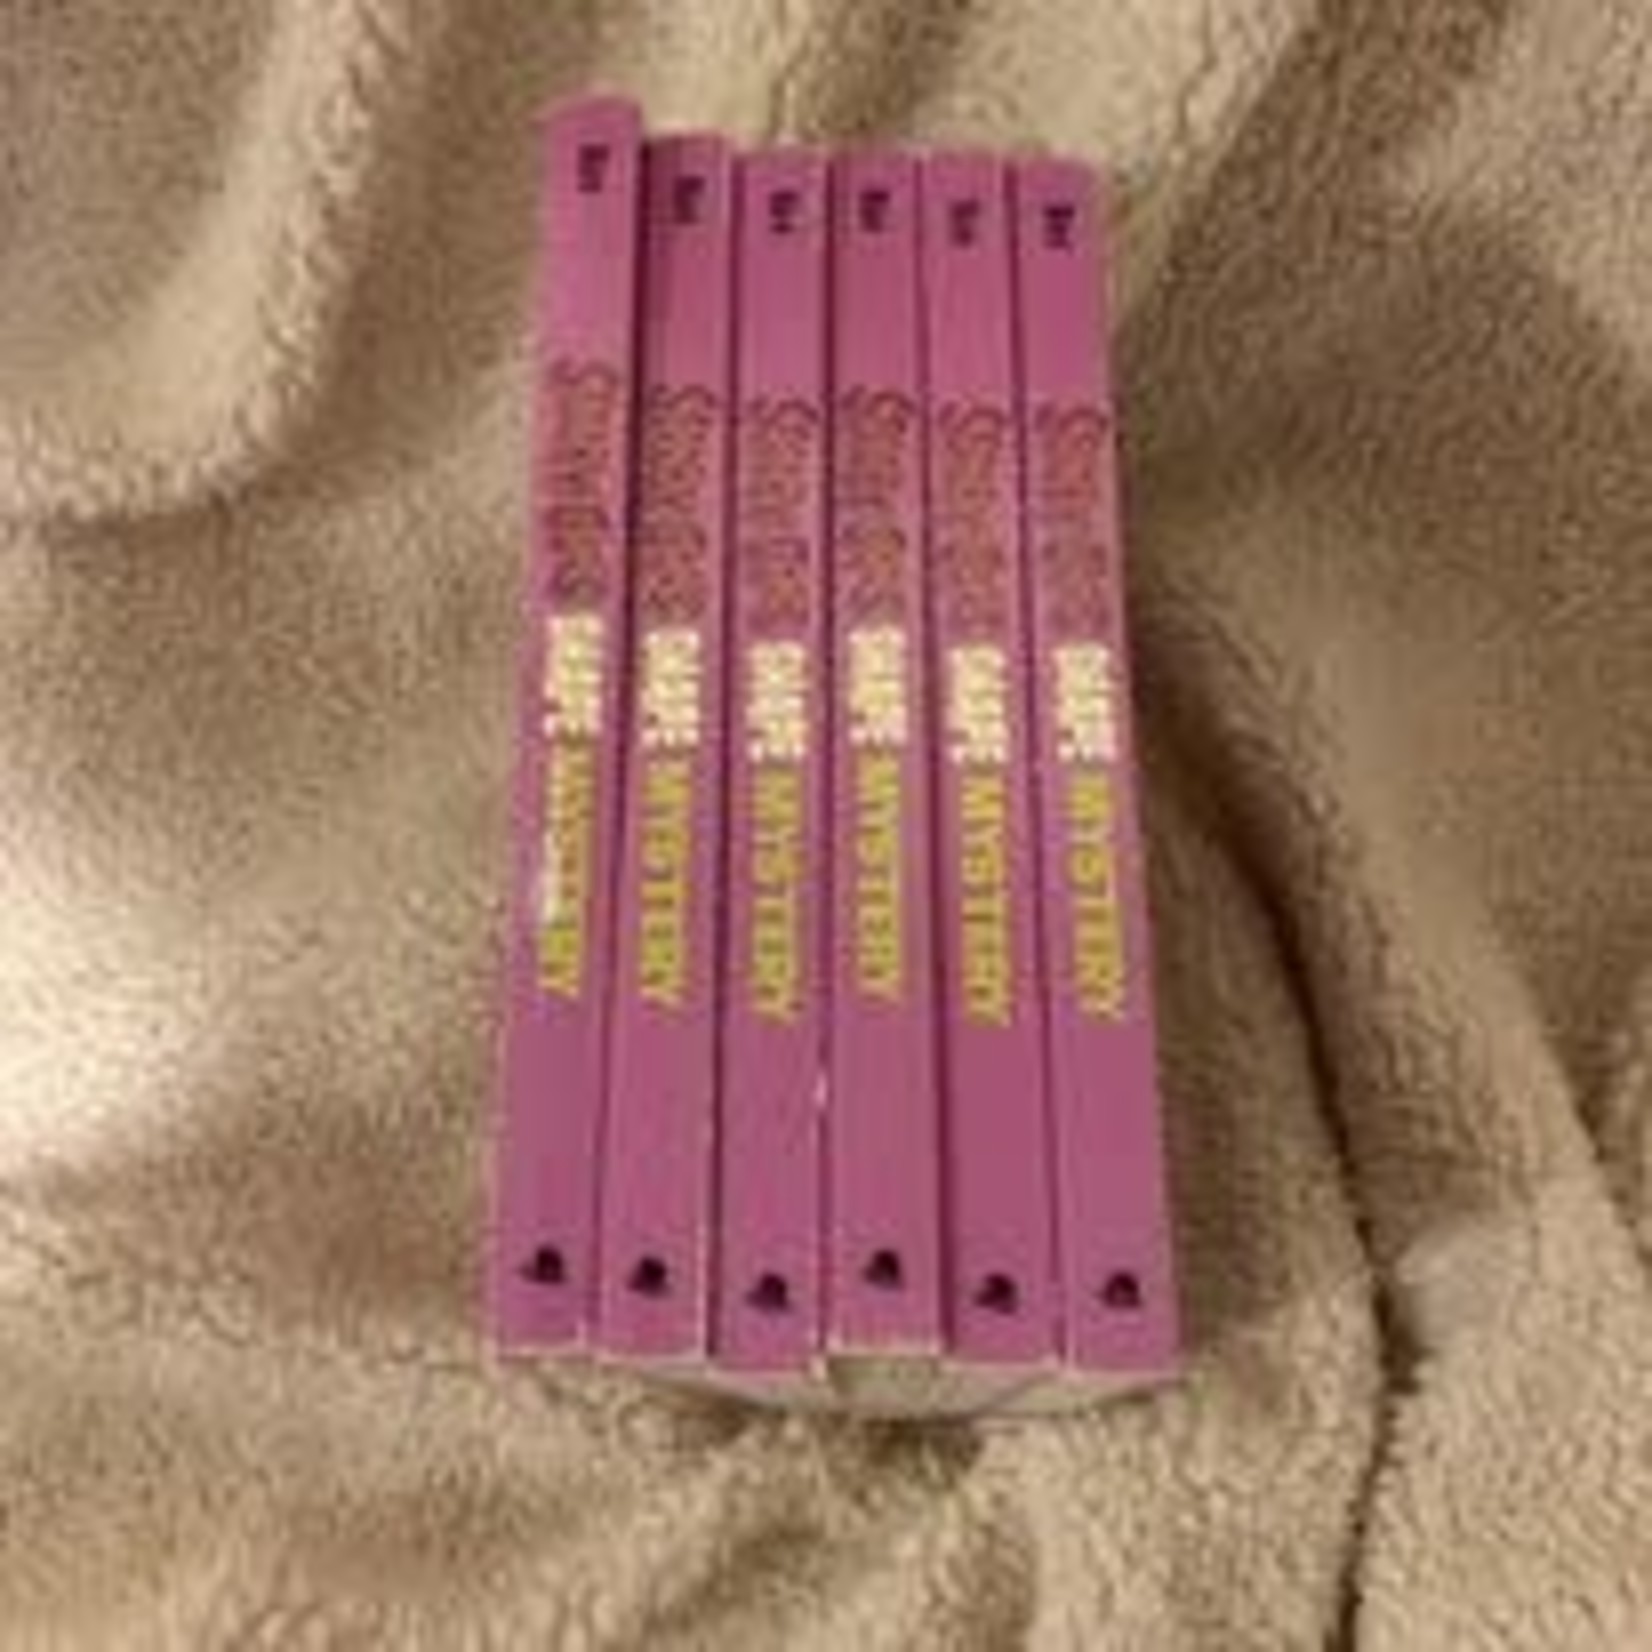 Scooby-Doo's Shape Mystery Set (6 Identical Books Included)